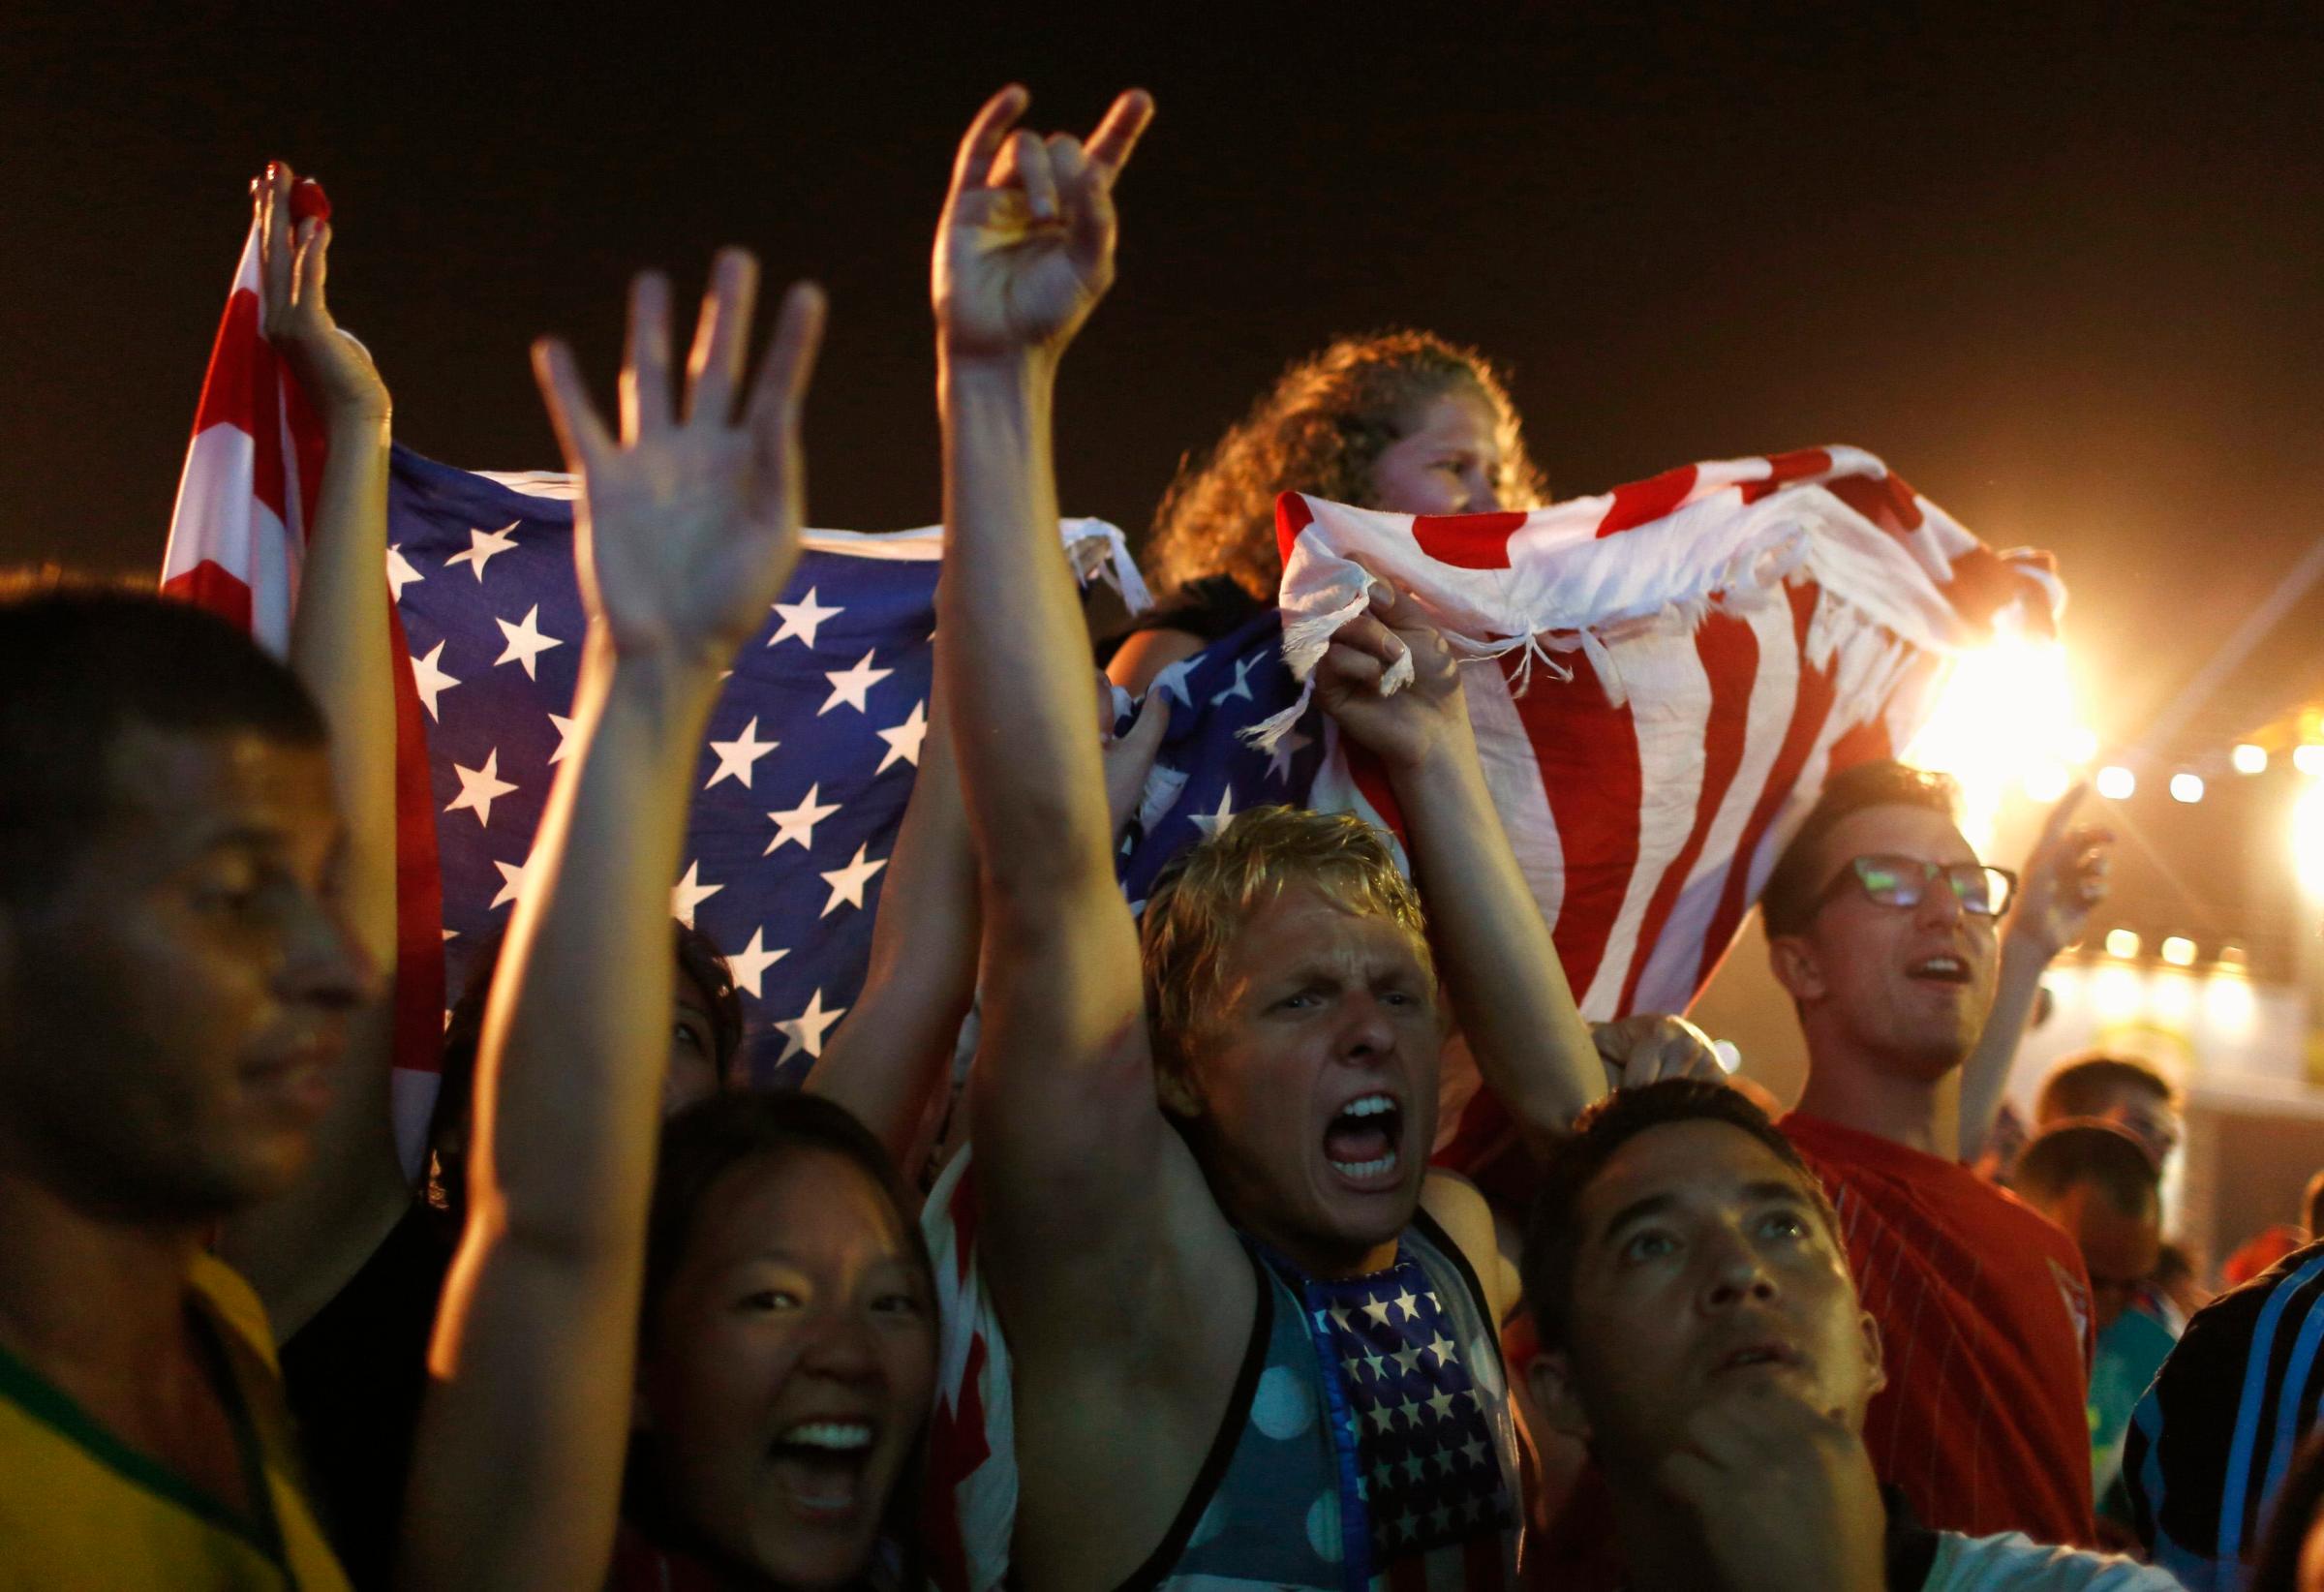 U.S. soccer fans celebrate at the end of the 2014 World Cup soccer match between U.S. and Ghana, which was broadcast on a large screen at Copacabana beach, in Rio de Janeiro